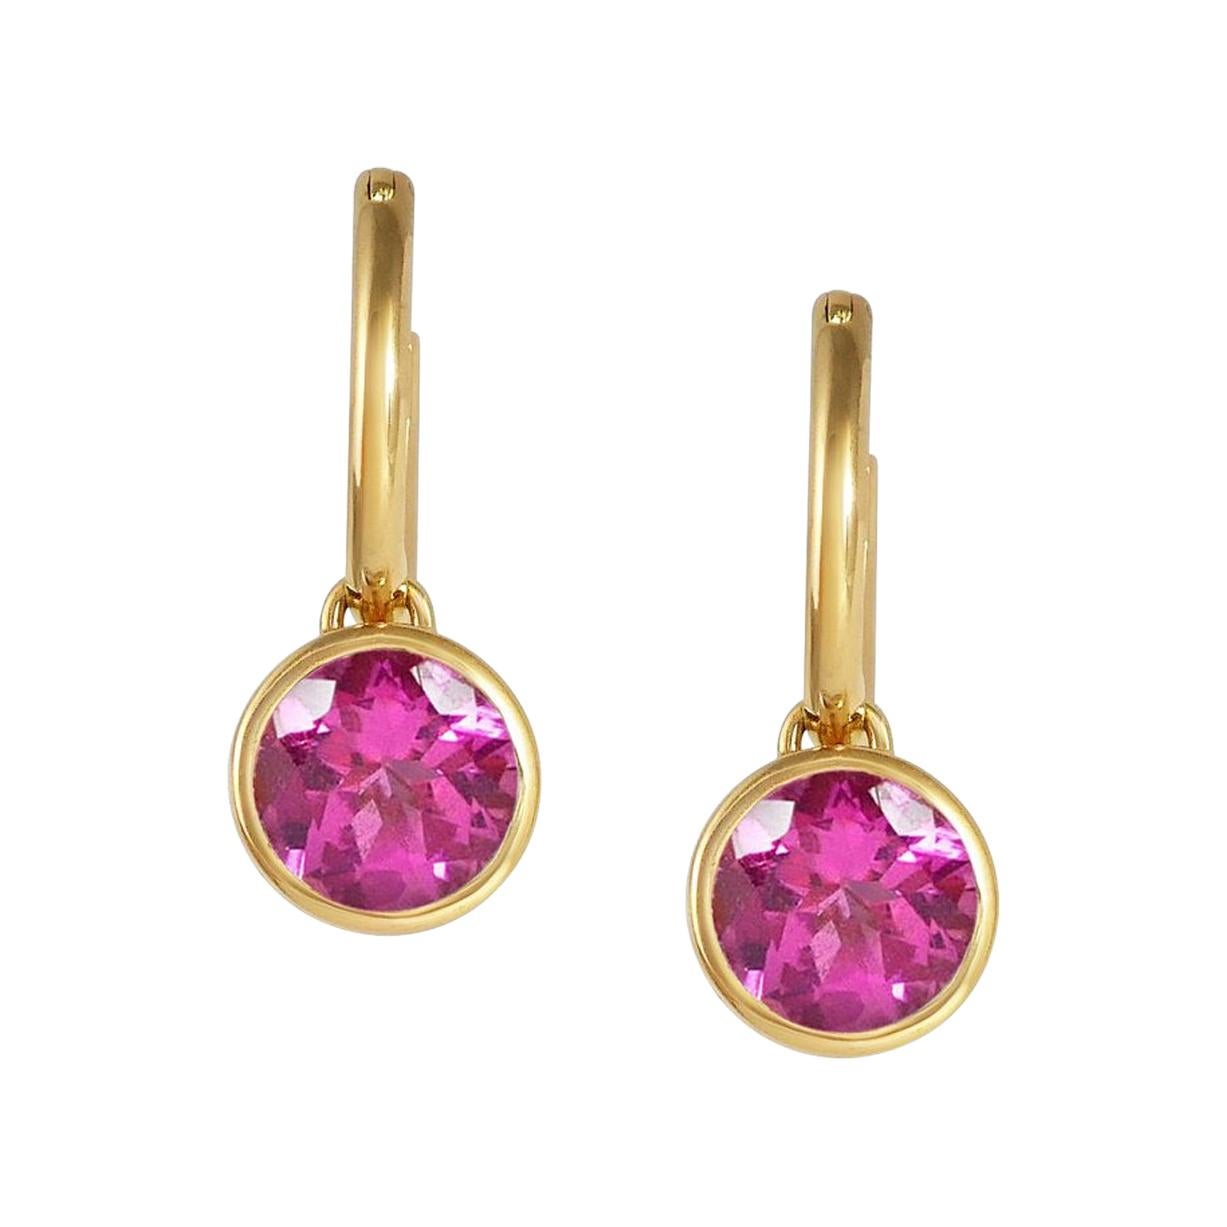 Handcrafted 2.60 Carats Pink Tourmaline 18 Karat Yellow Gold Drop Earrings For Sale